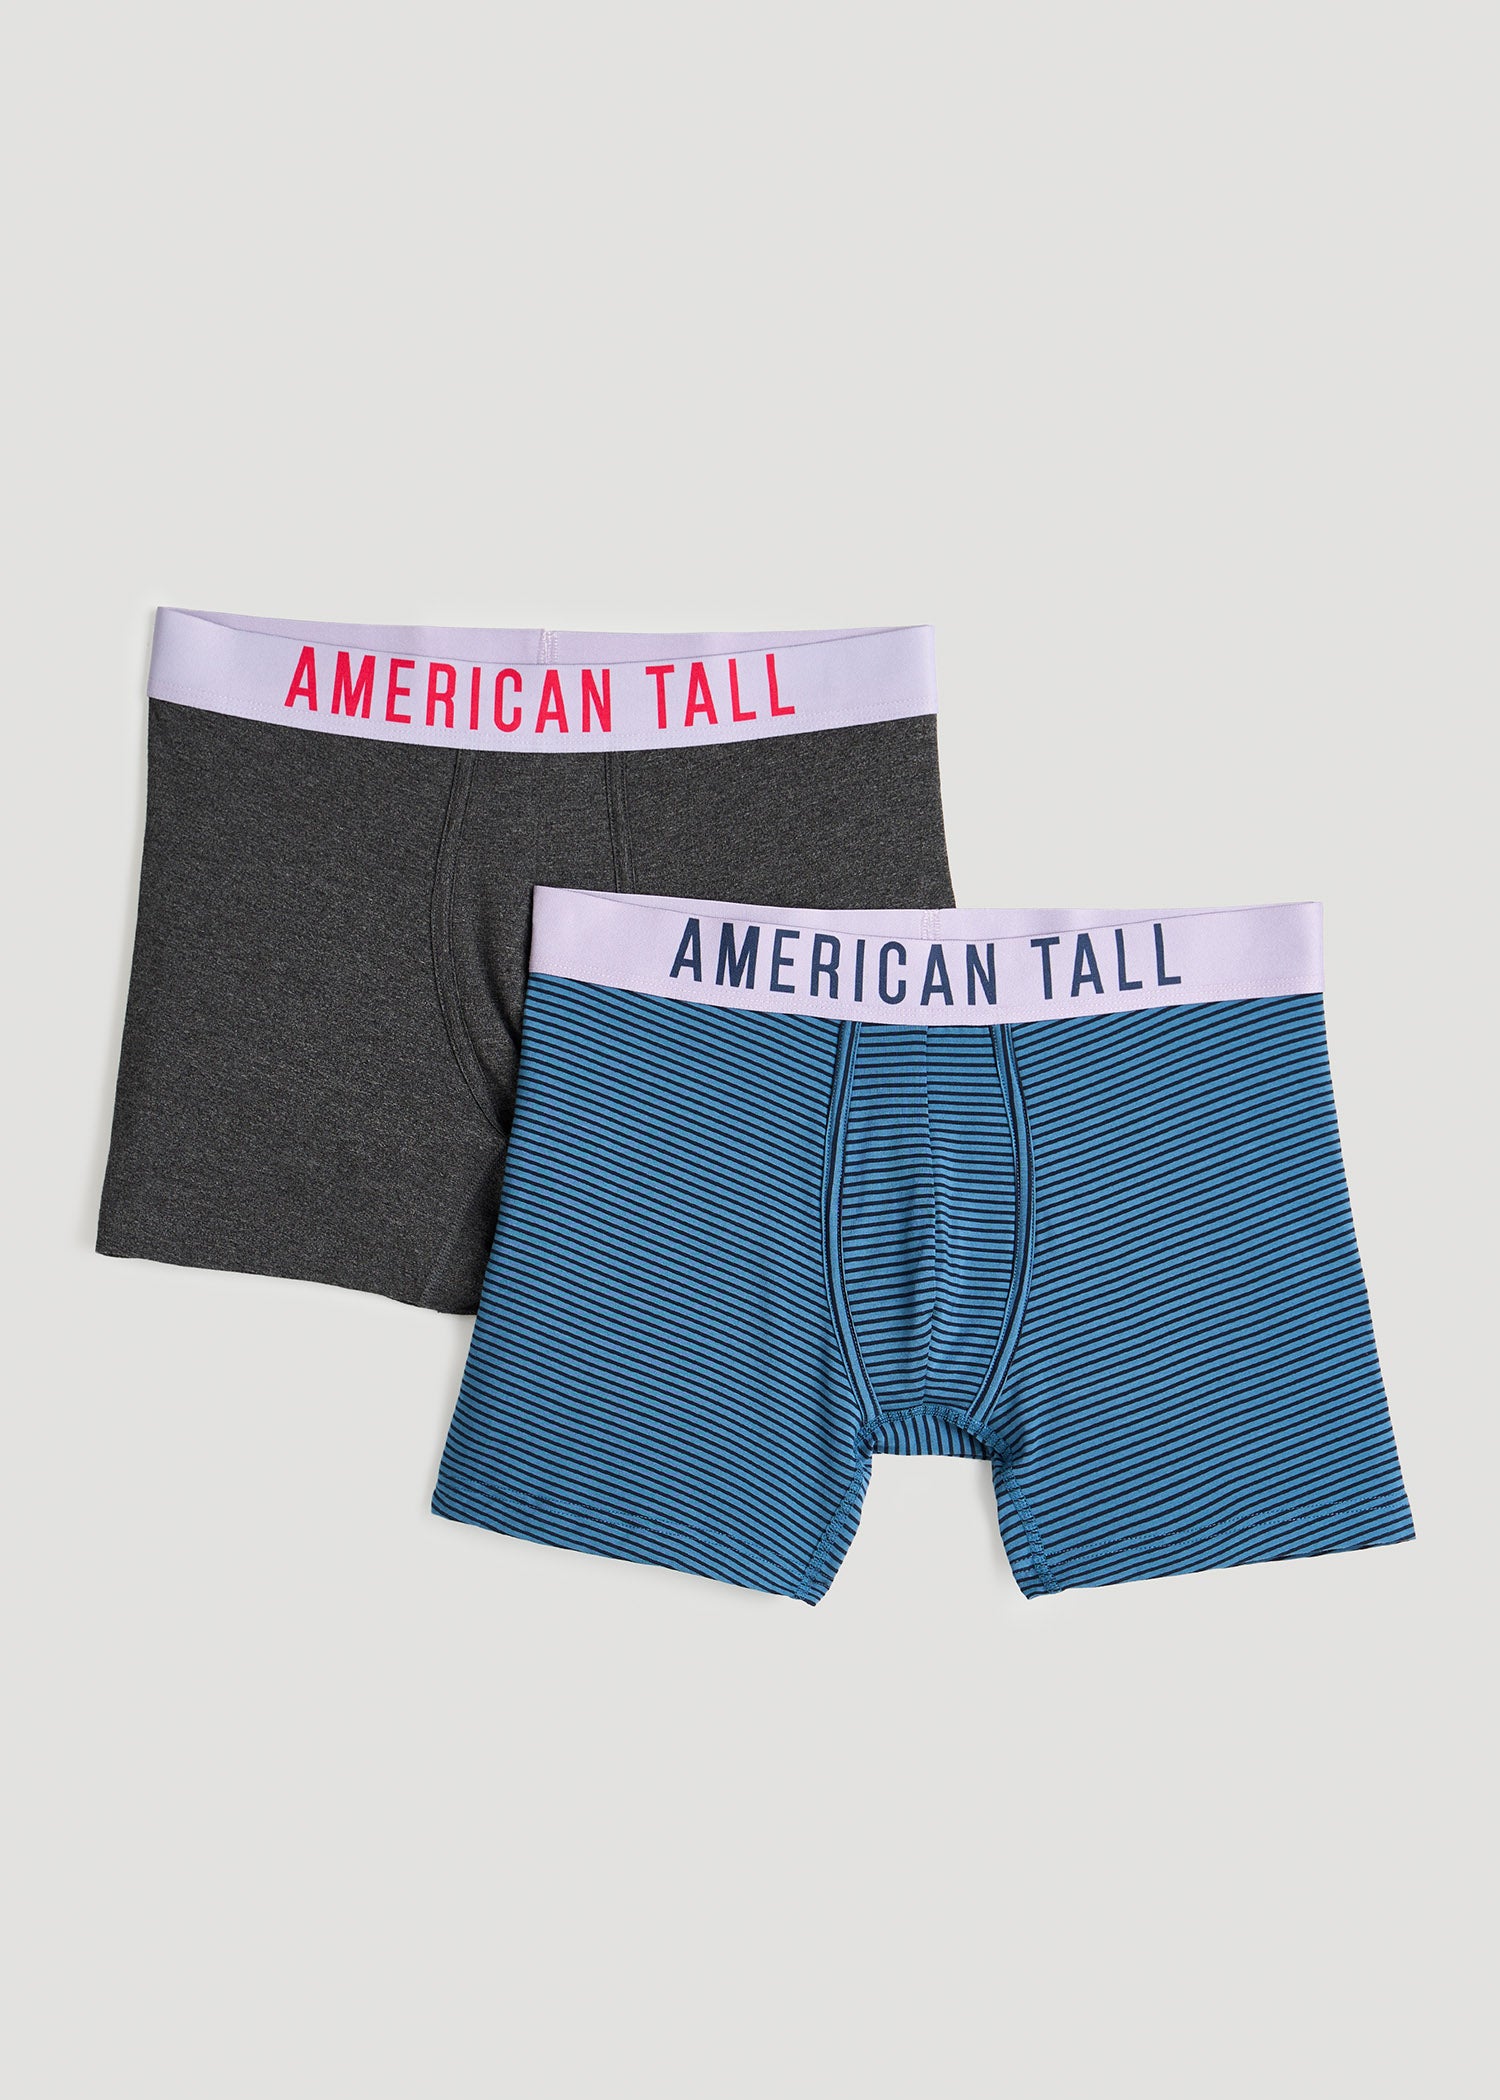 American-Tall-Mens-Tall-Original-Boxer-Briefs-in-Black-2-Pack-Blue-Grey-Mix-front